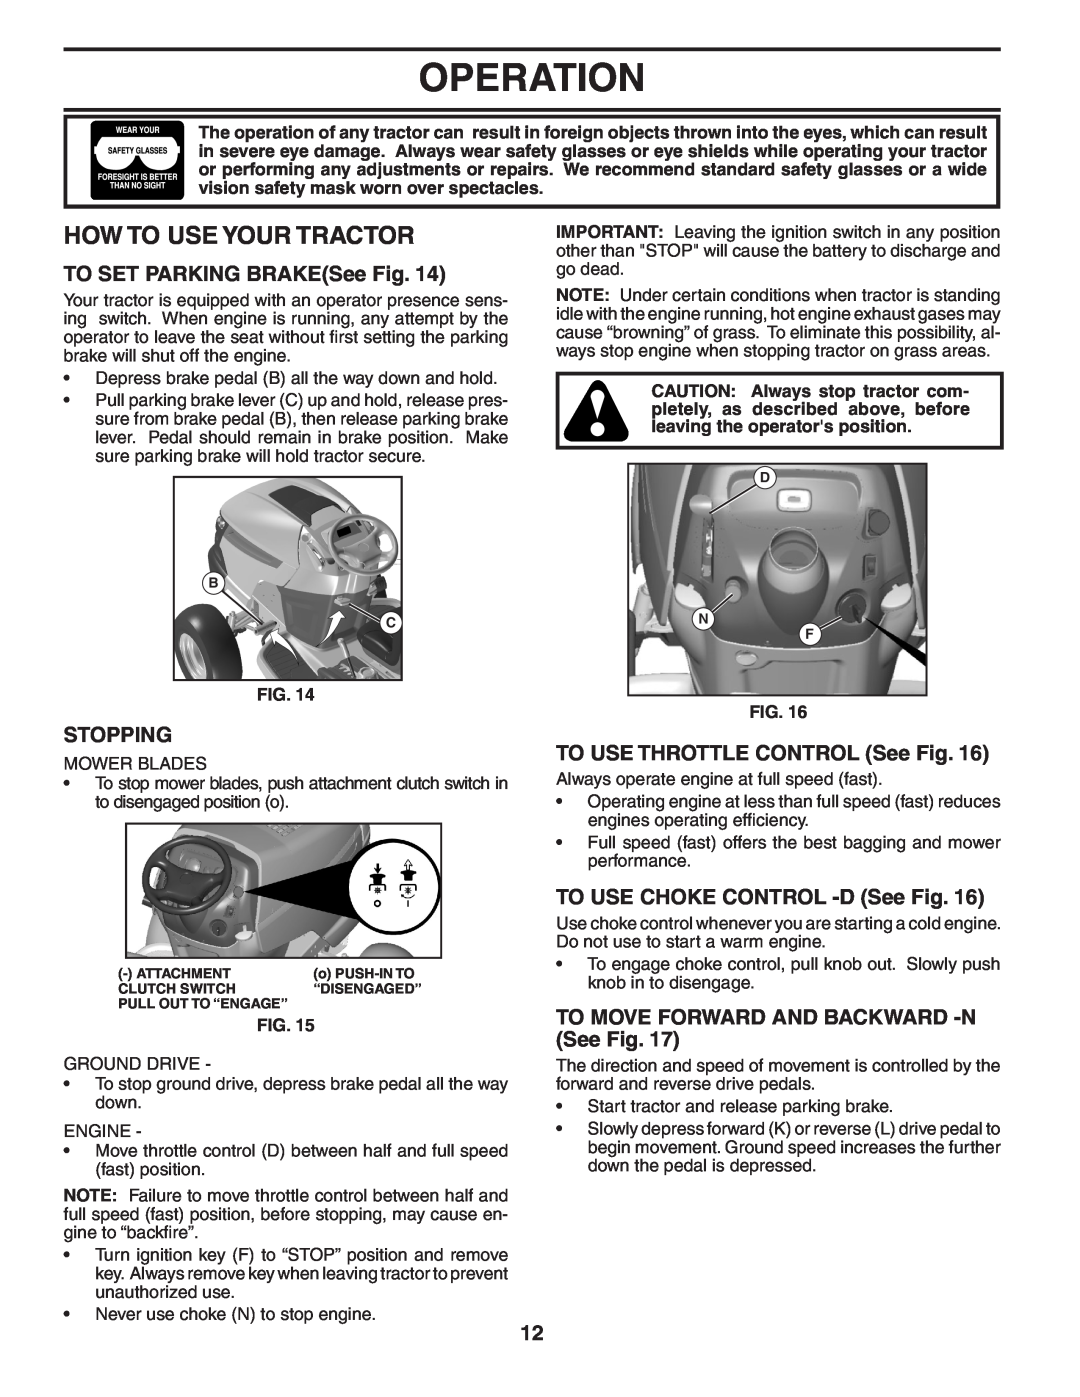 Poulan PBGT22H54 manual How To Use Your Tractor, TO SET PARKING BRAKESee Fig, Stopping, TO USE THROTTLE CONTROL See Fig 